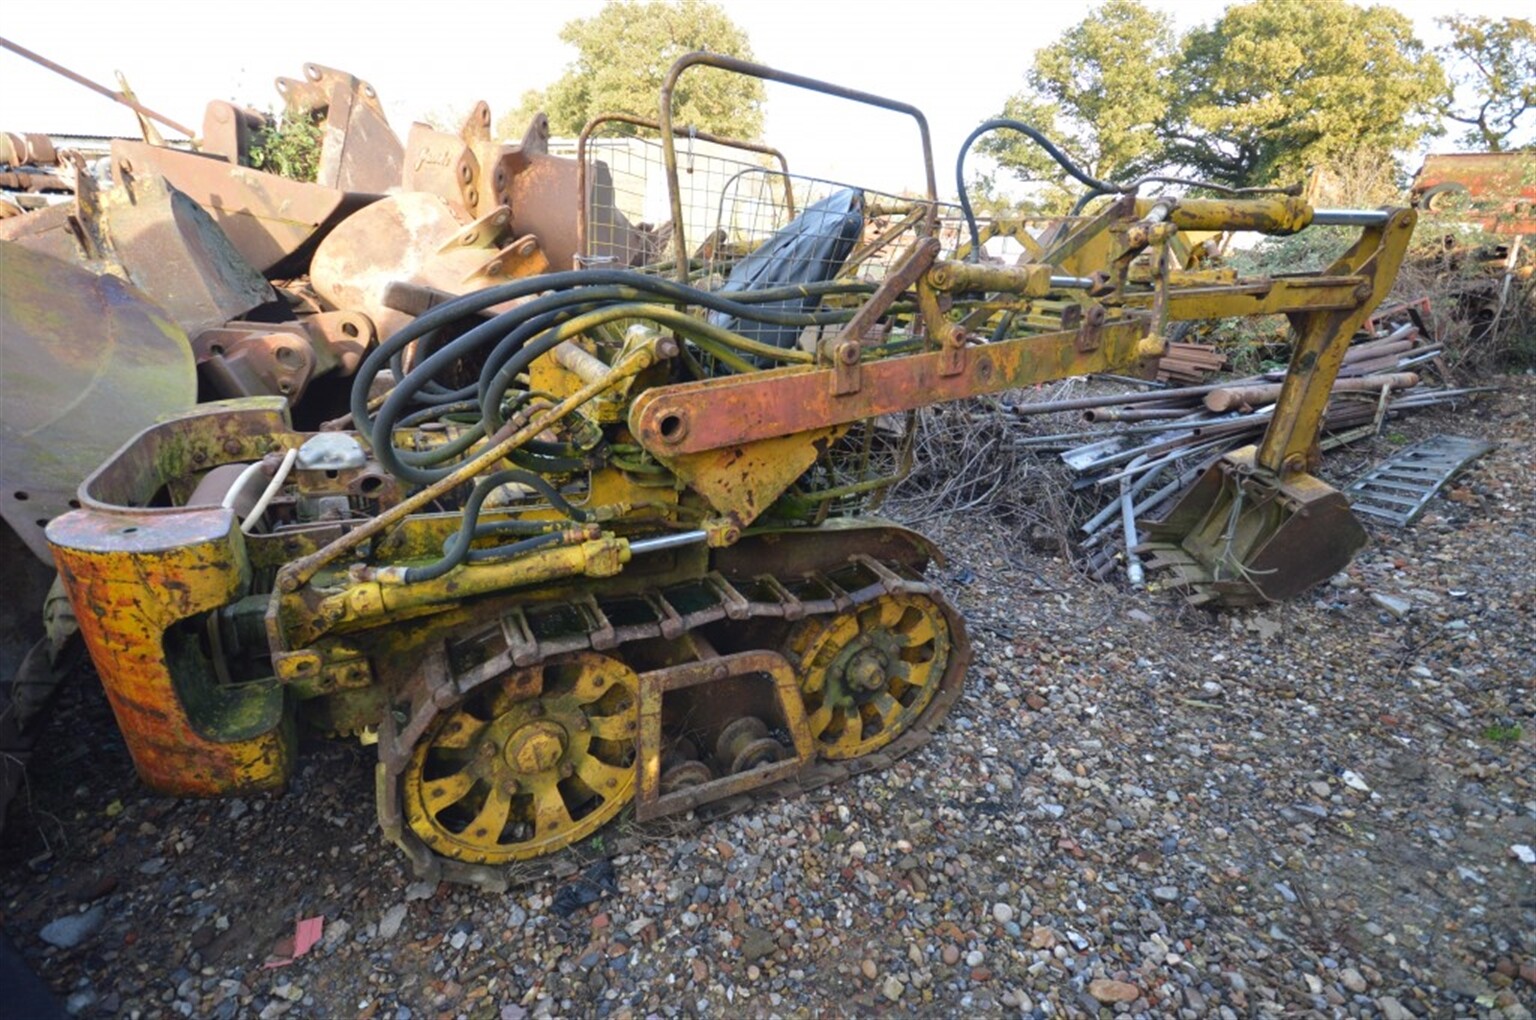 Classic machines uncovered at plant yard (Part Two)